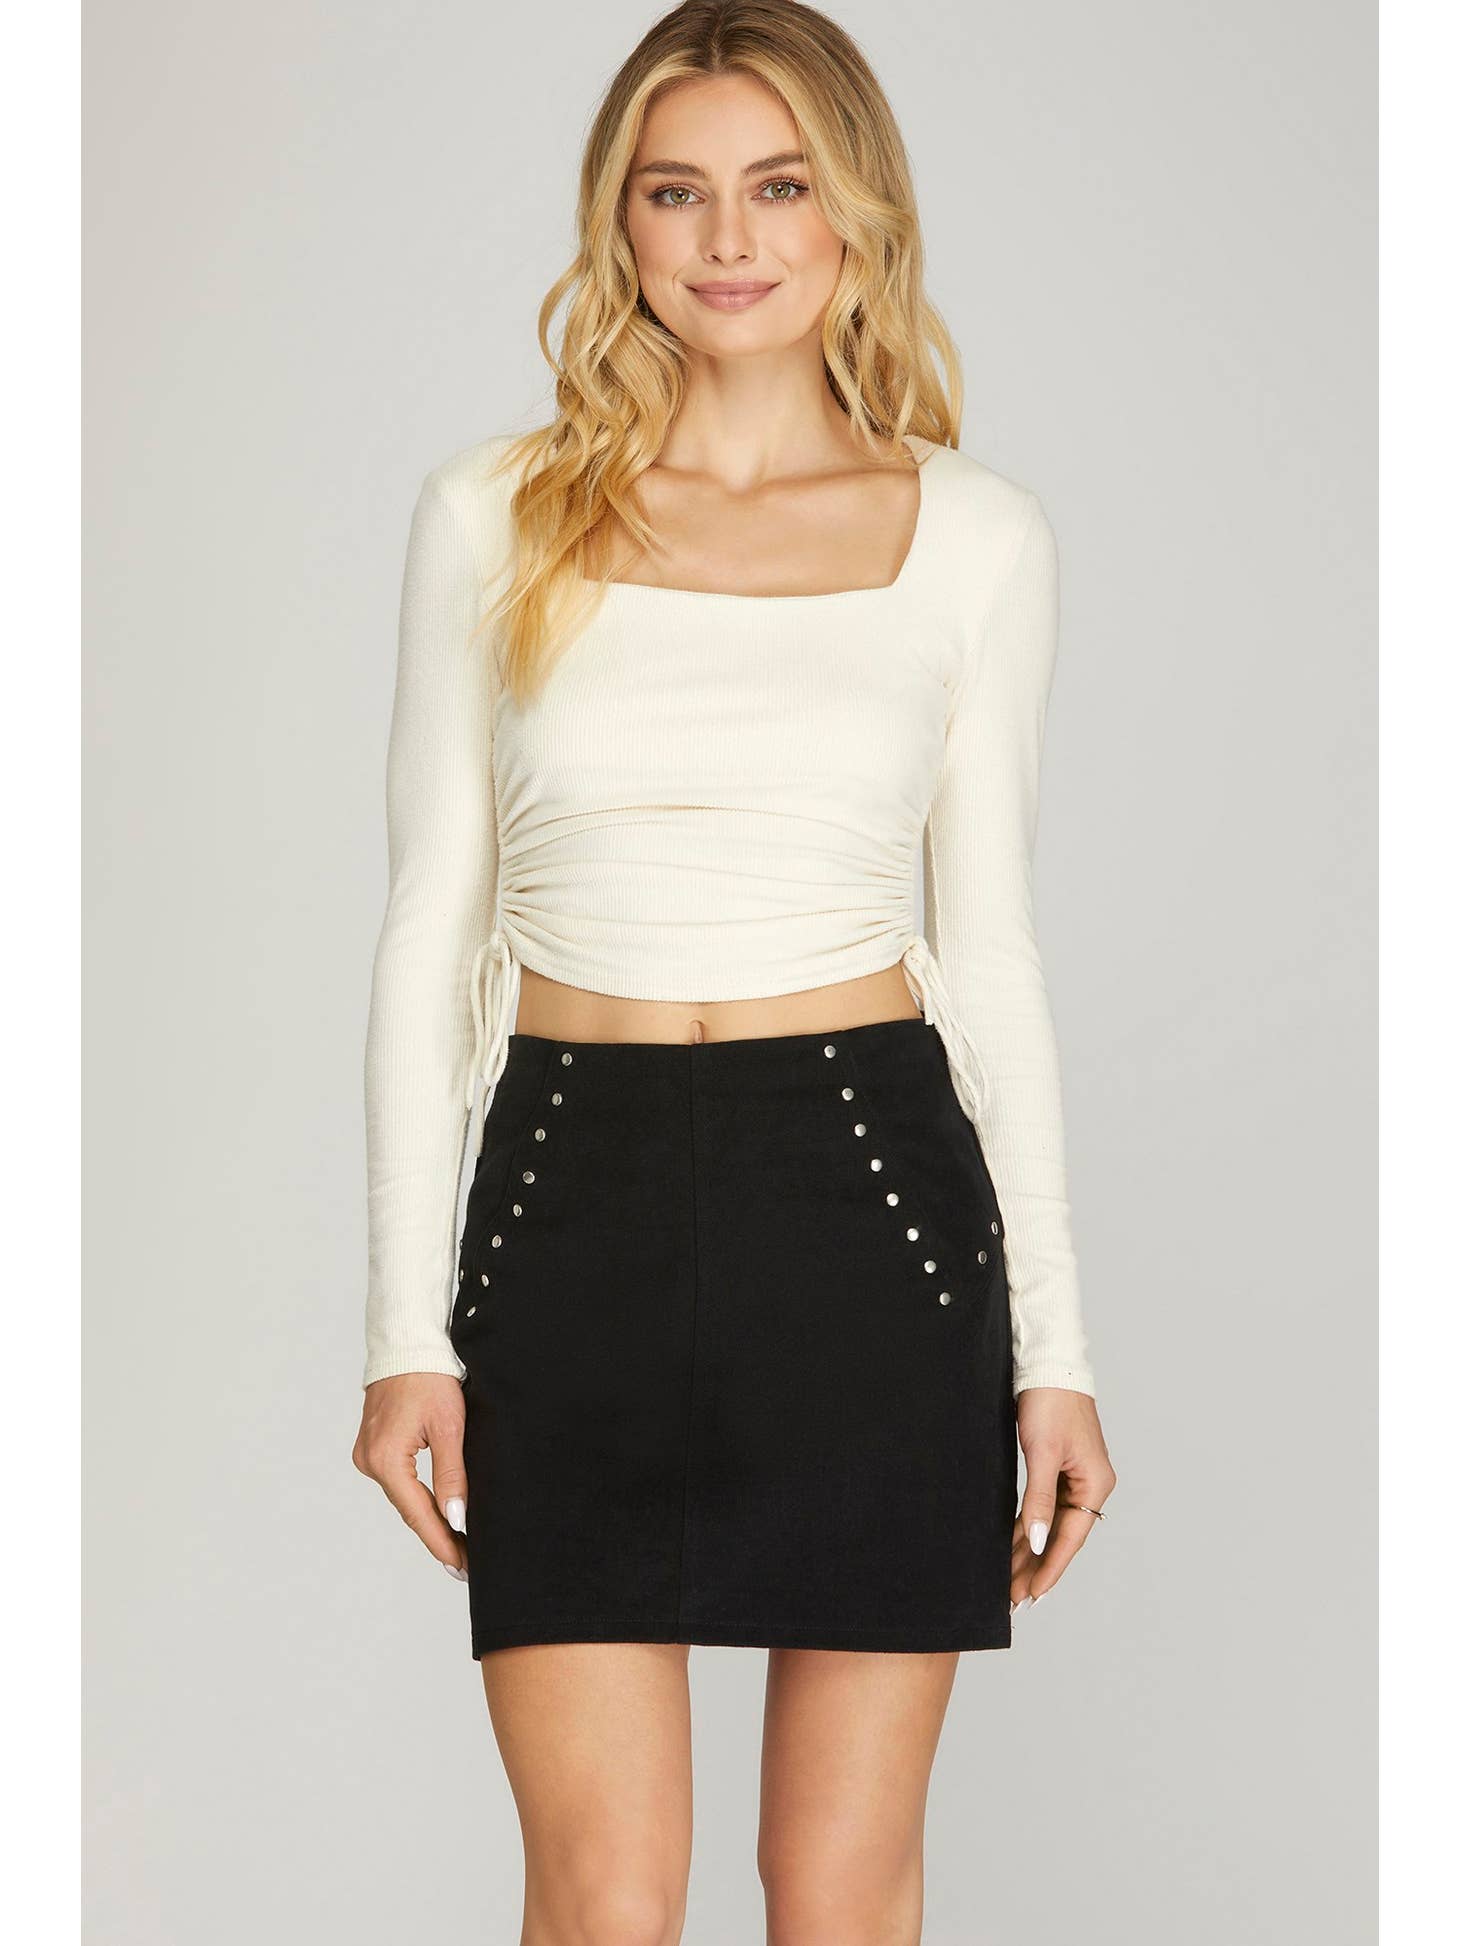 Black mini skirt with stud detail, REBELRY BOUTIQUE, Arvada, CO